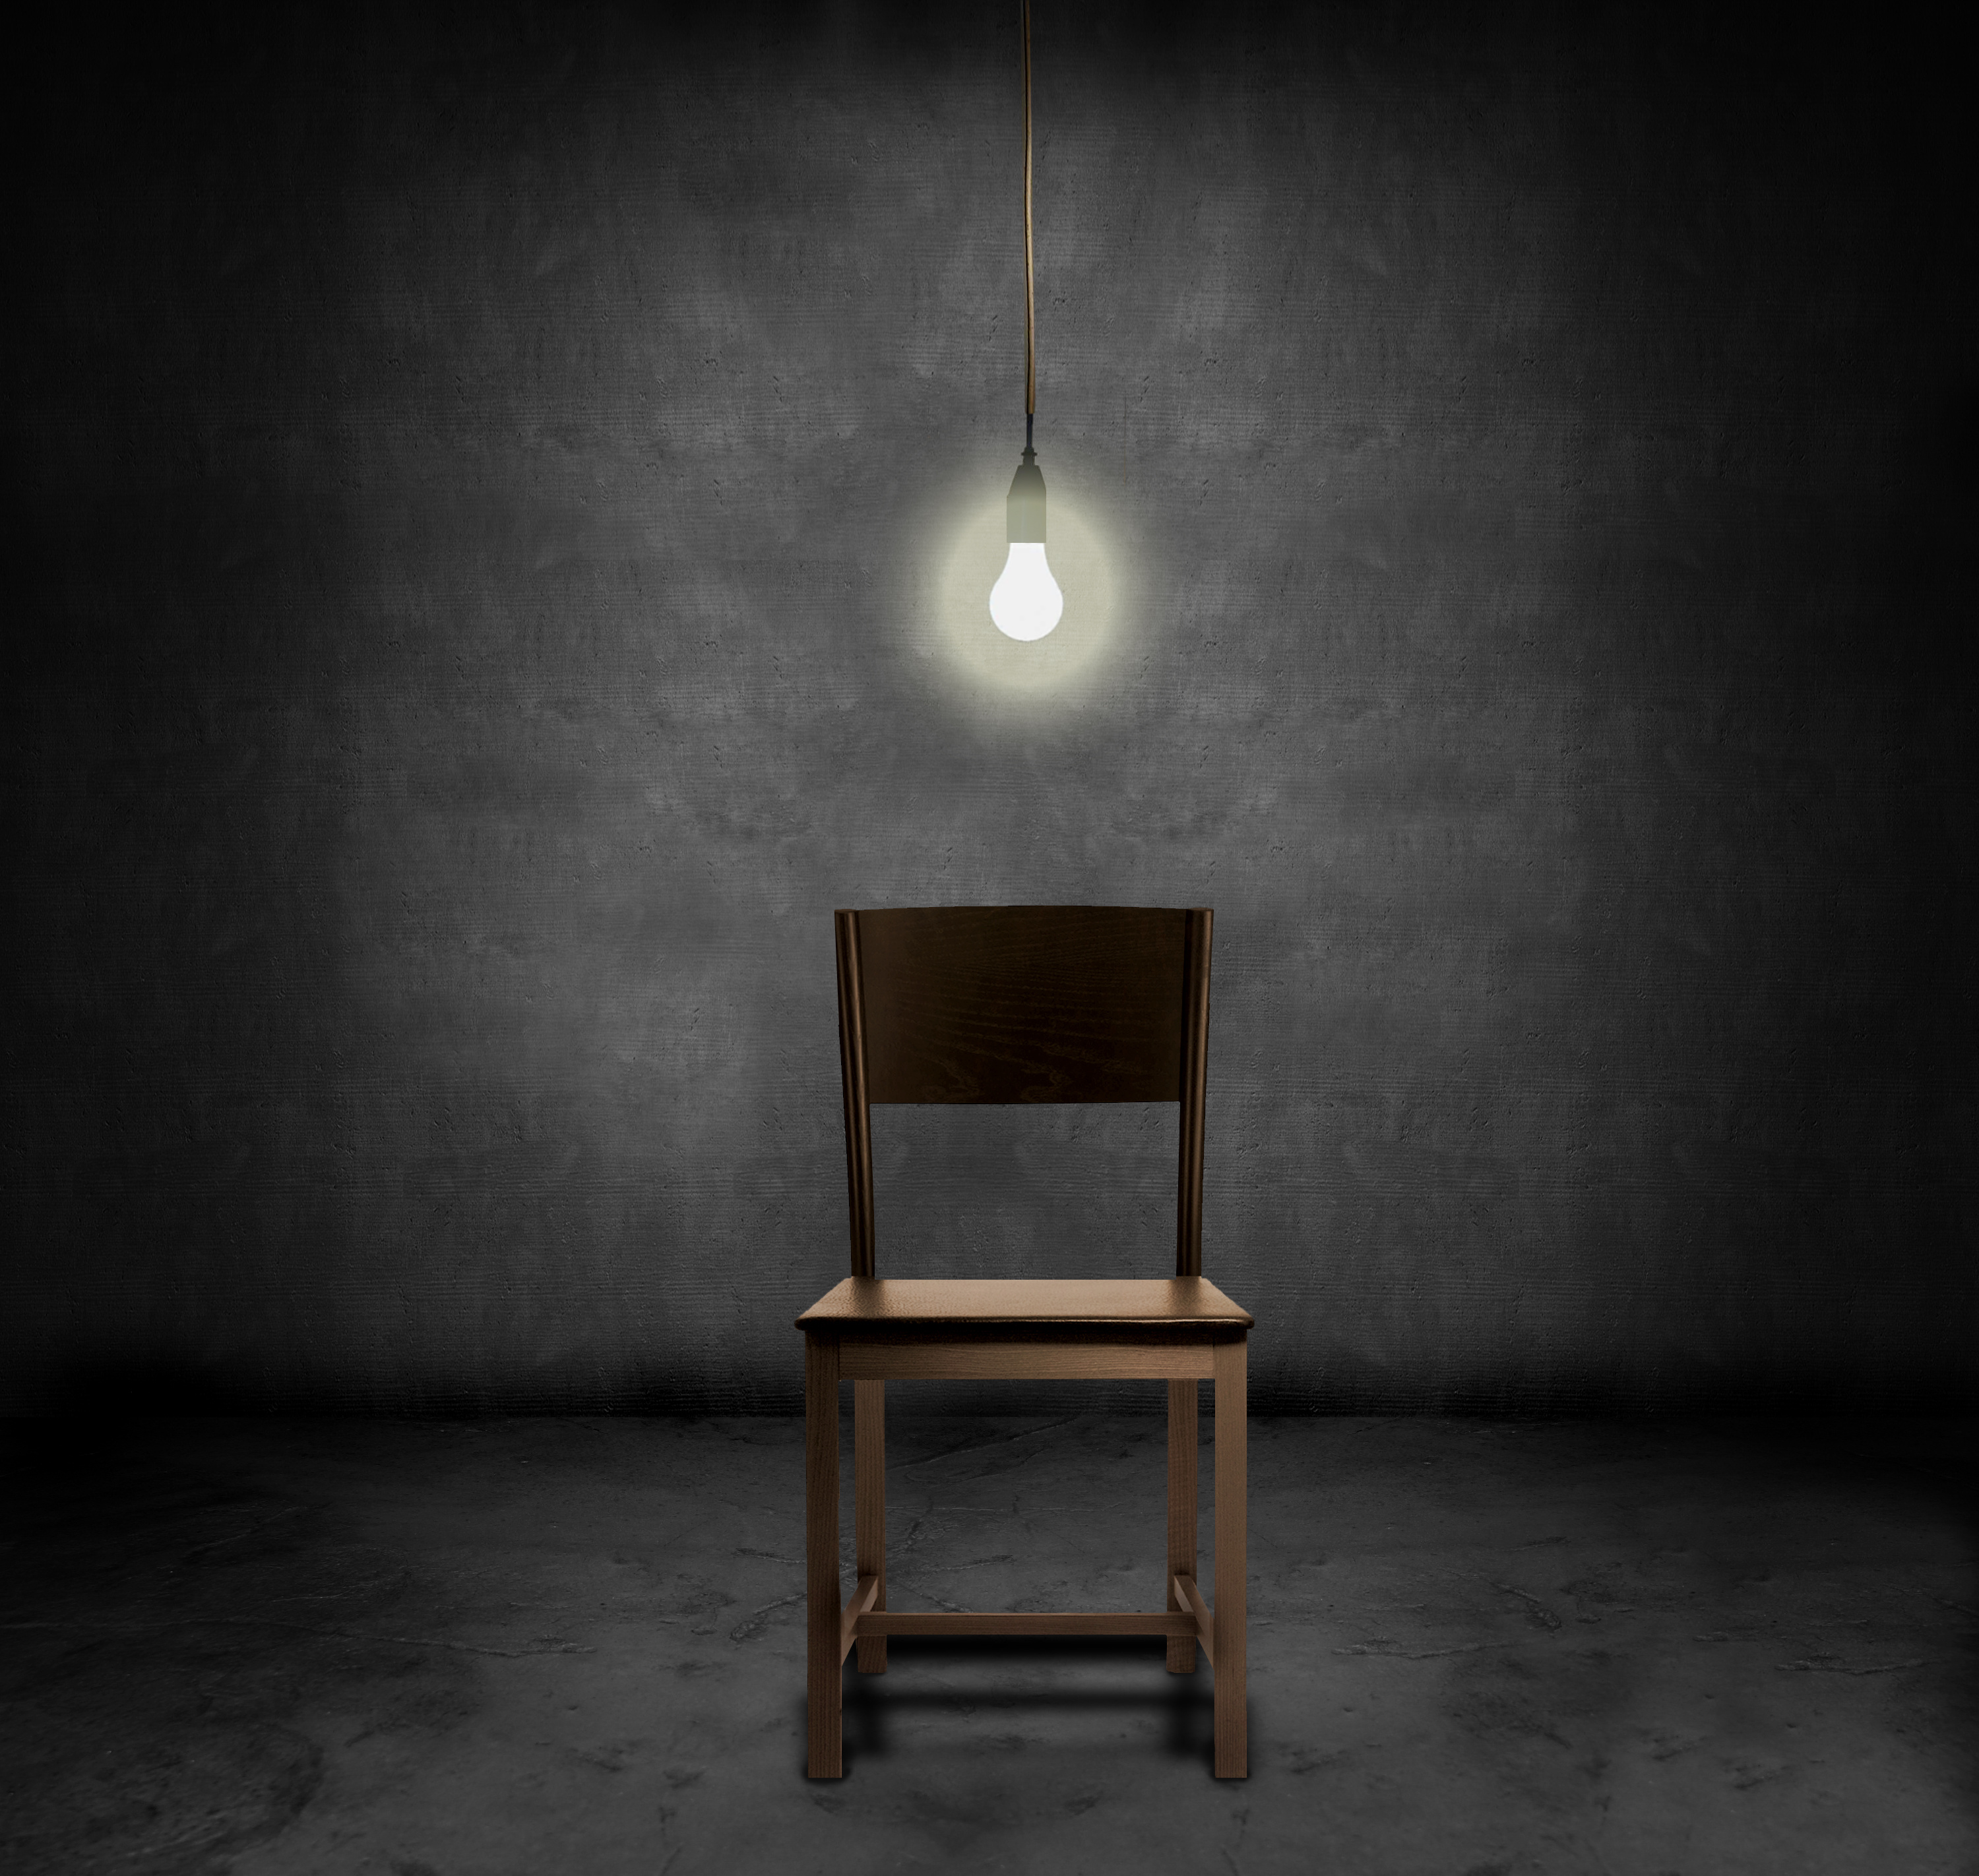 An empty chair and hannging light bulb in a dark room